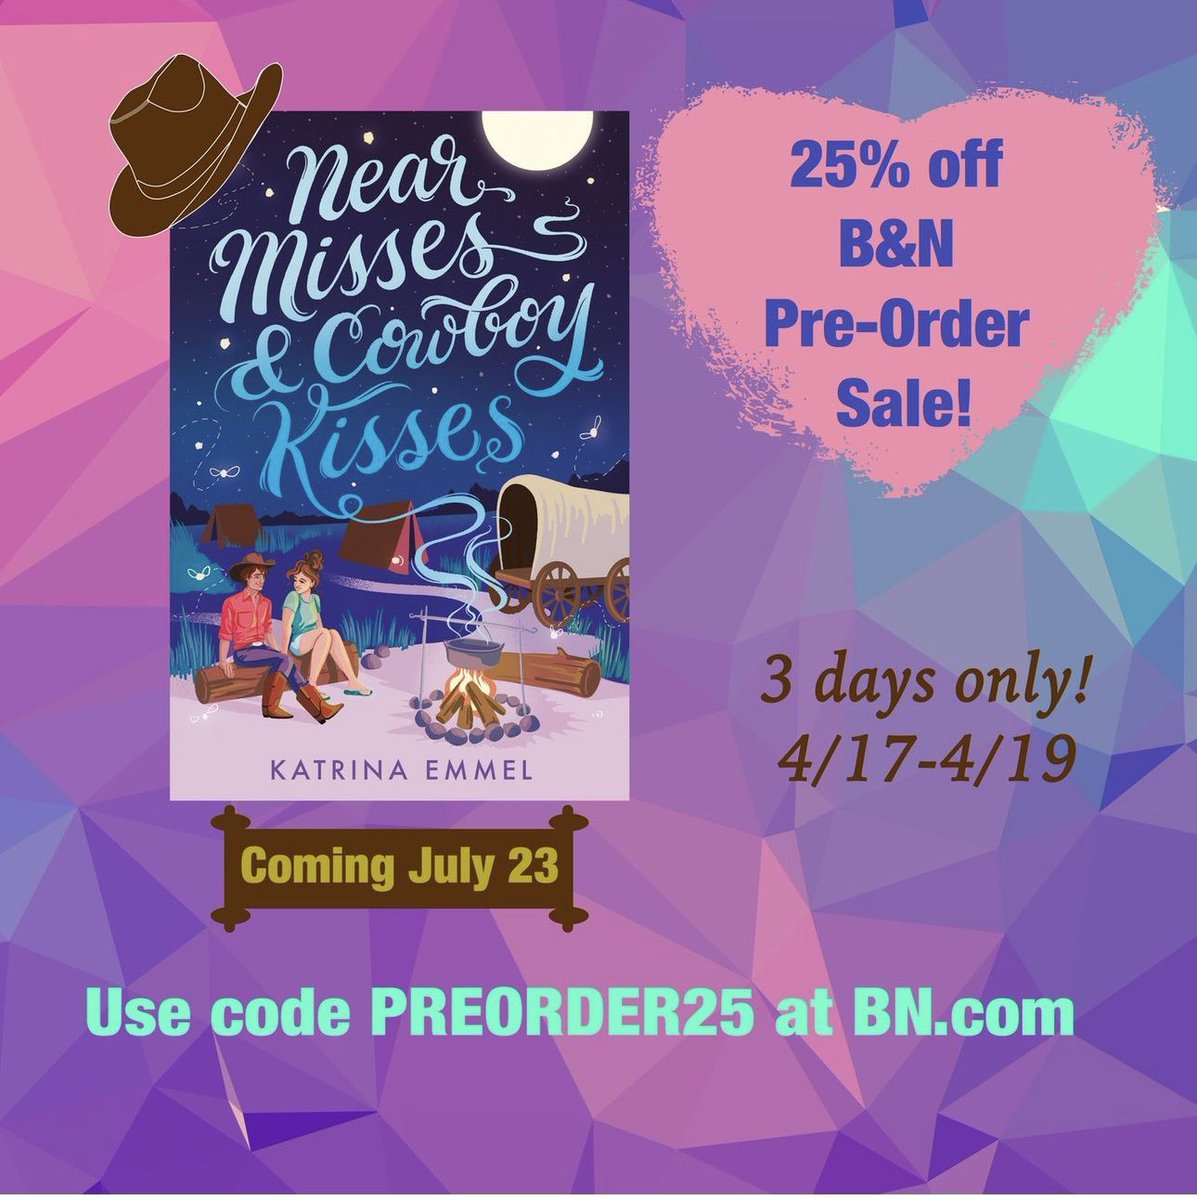 Barnes & Noble’s pre-order sale is on! It’s the perfect time to save on upcoming titles, including NEAR MISSES & COWBOY KISSES. 

Anything’s possible under a prairie sky…

Cover art by @heyalissandra 

#barnesandnoble #preordersale #ya #romance #beachread